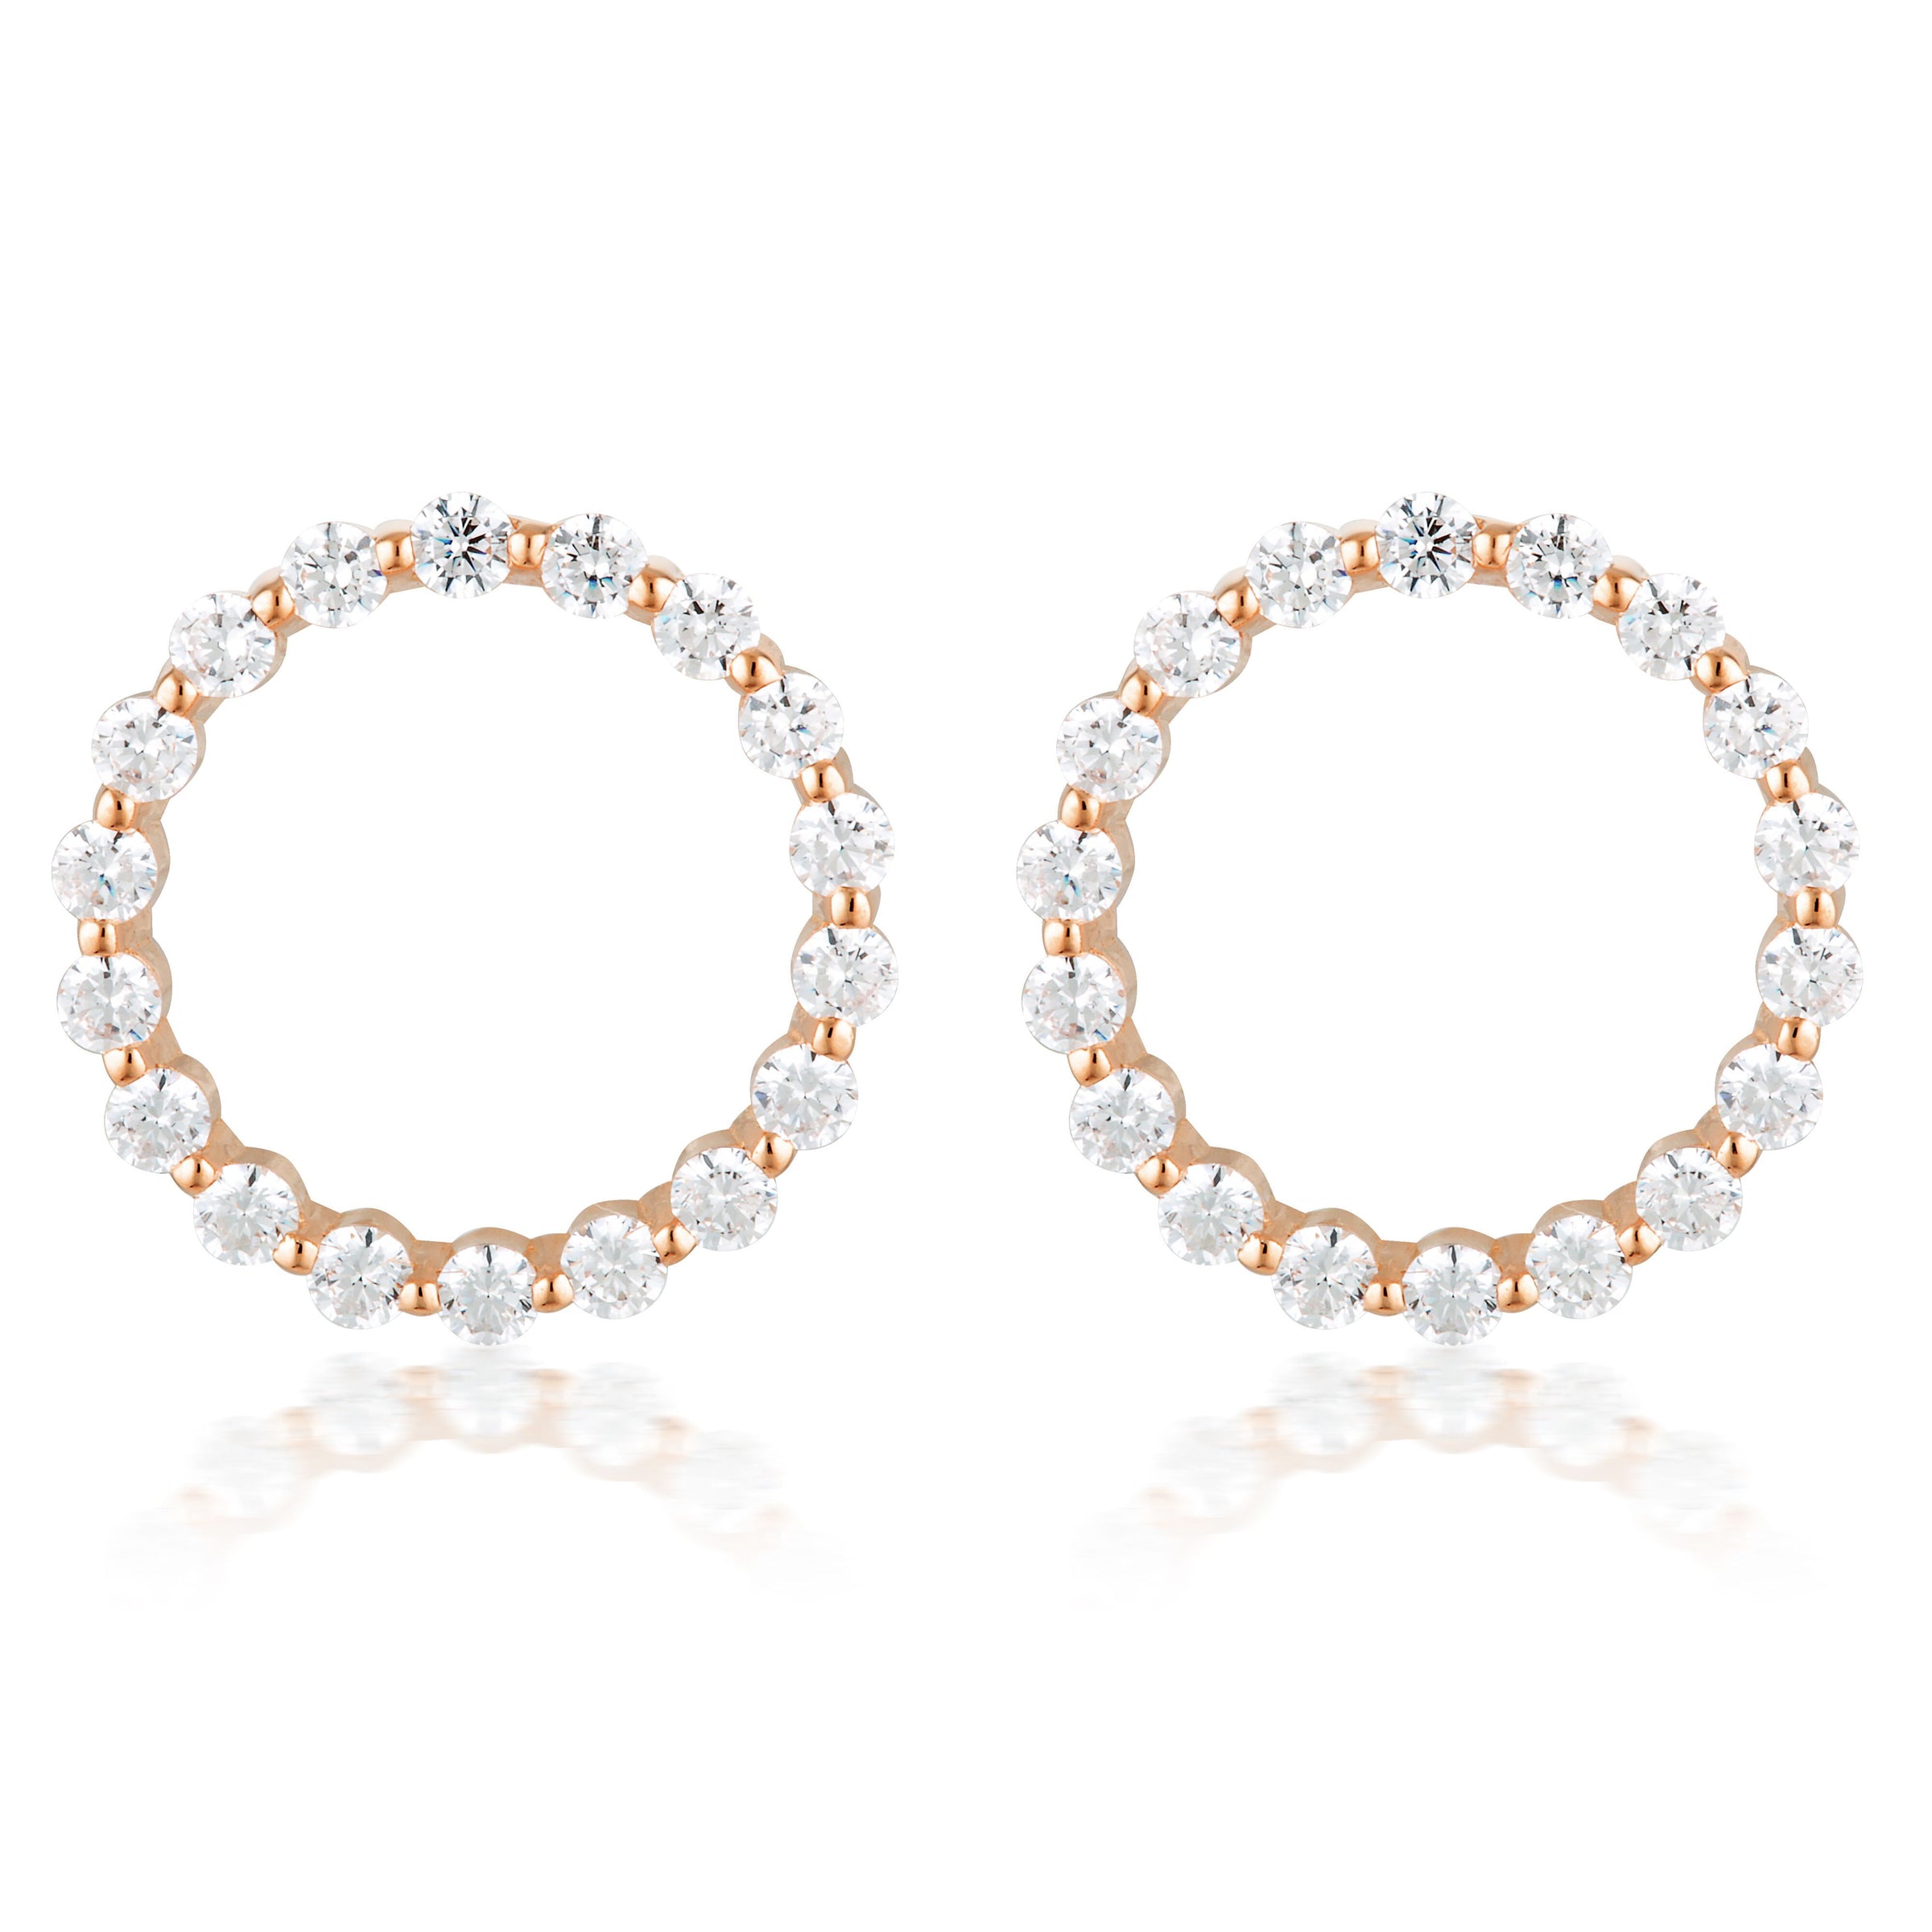 LARGE CIRCLE OF LIFE EARRING - ROSE GOLD Bevilles Jewellers 